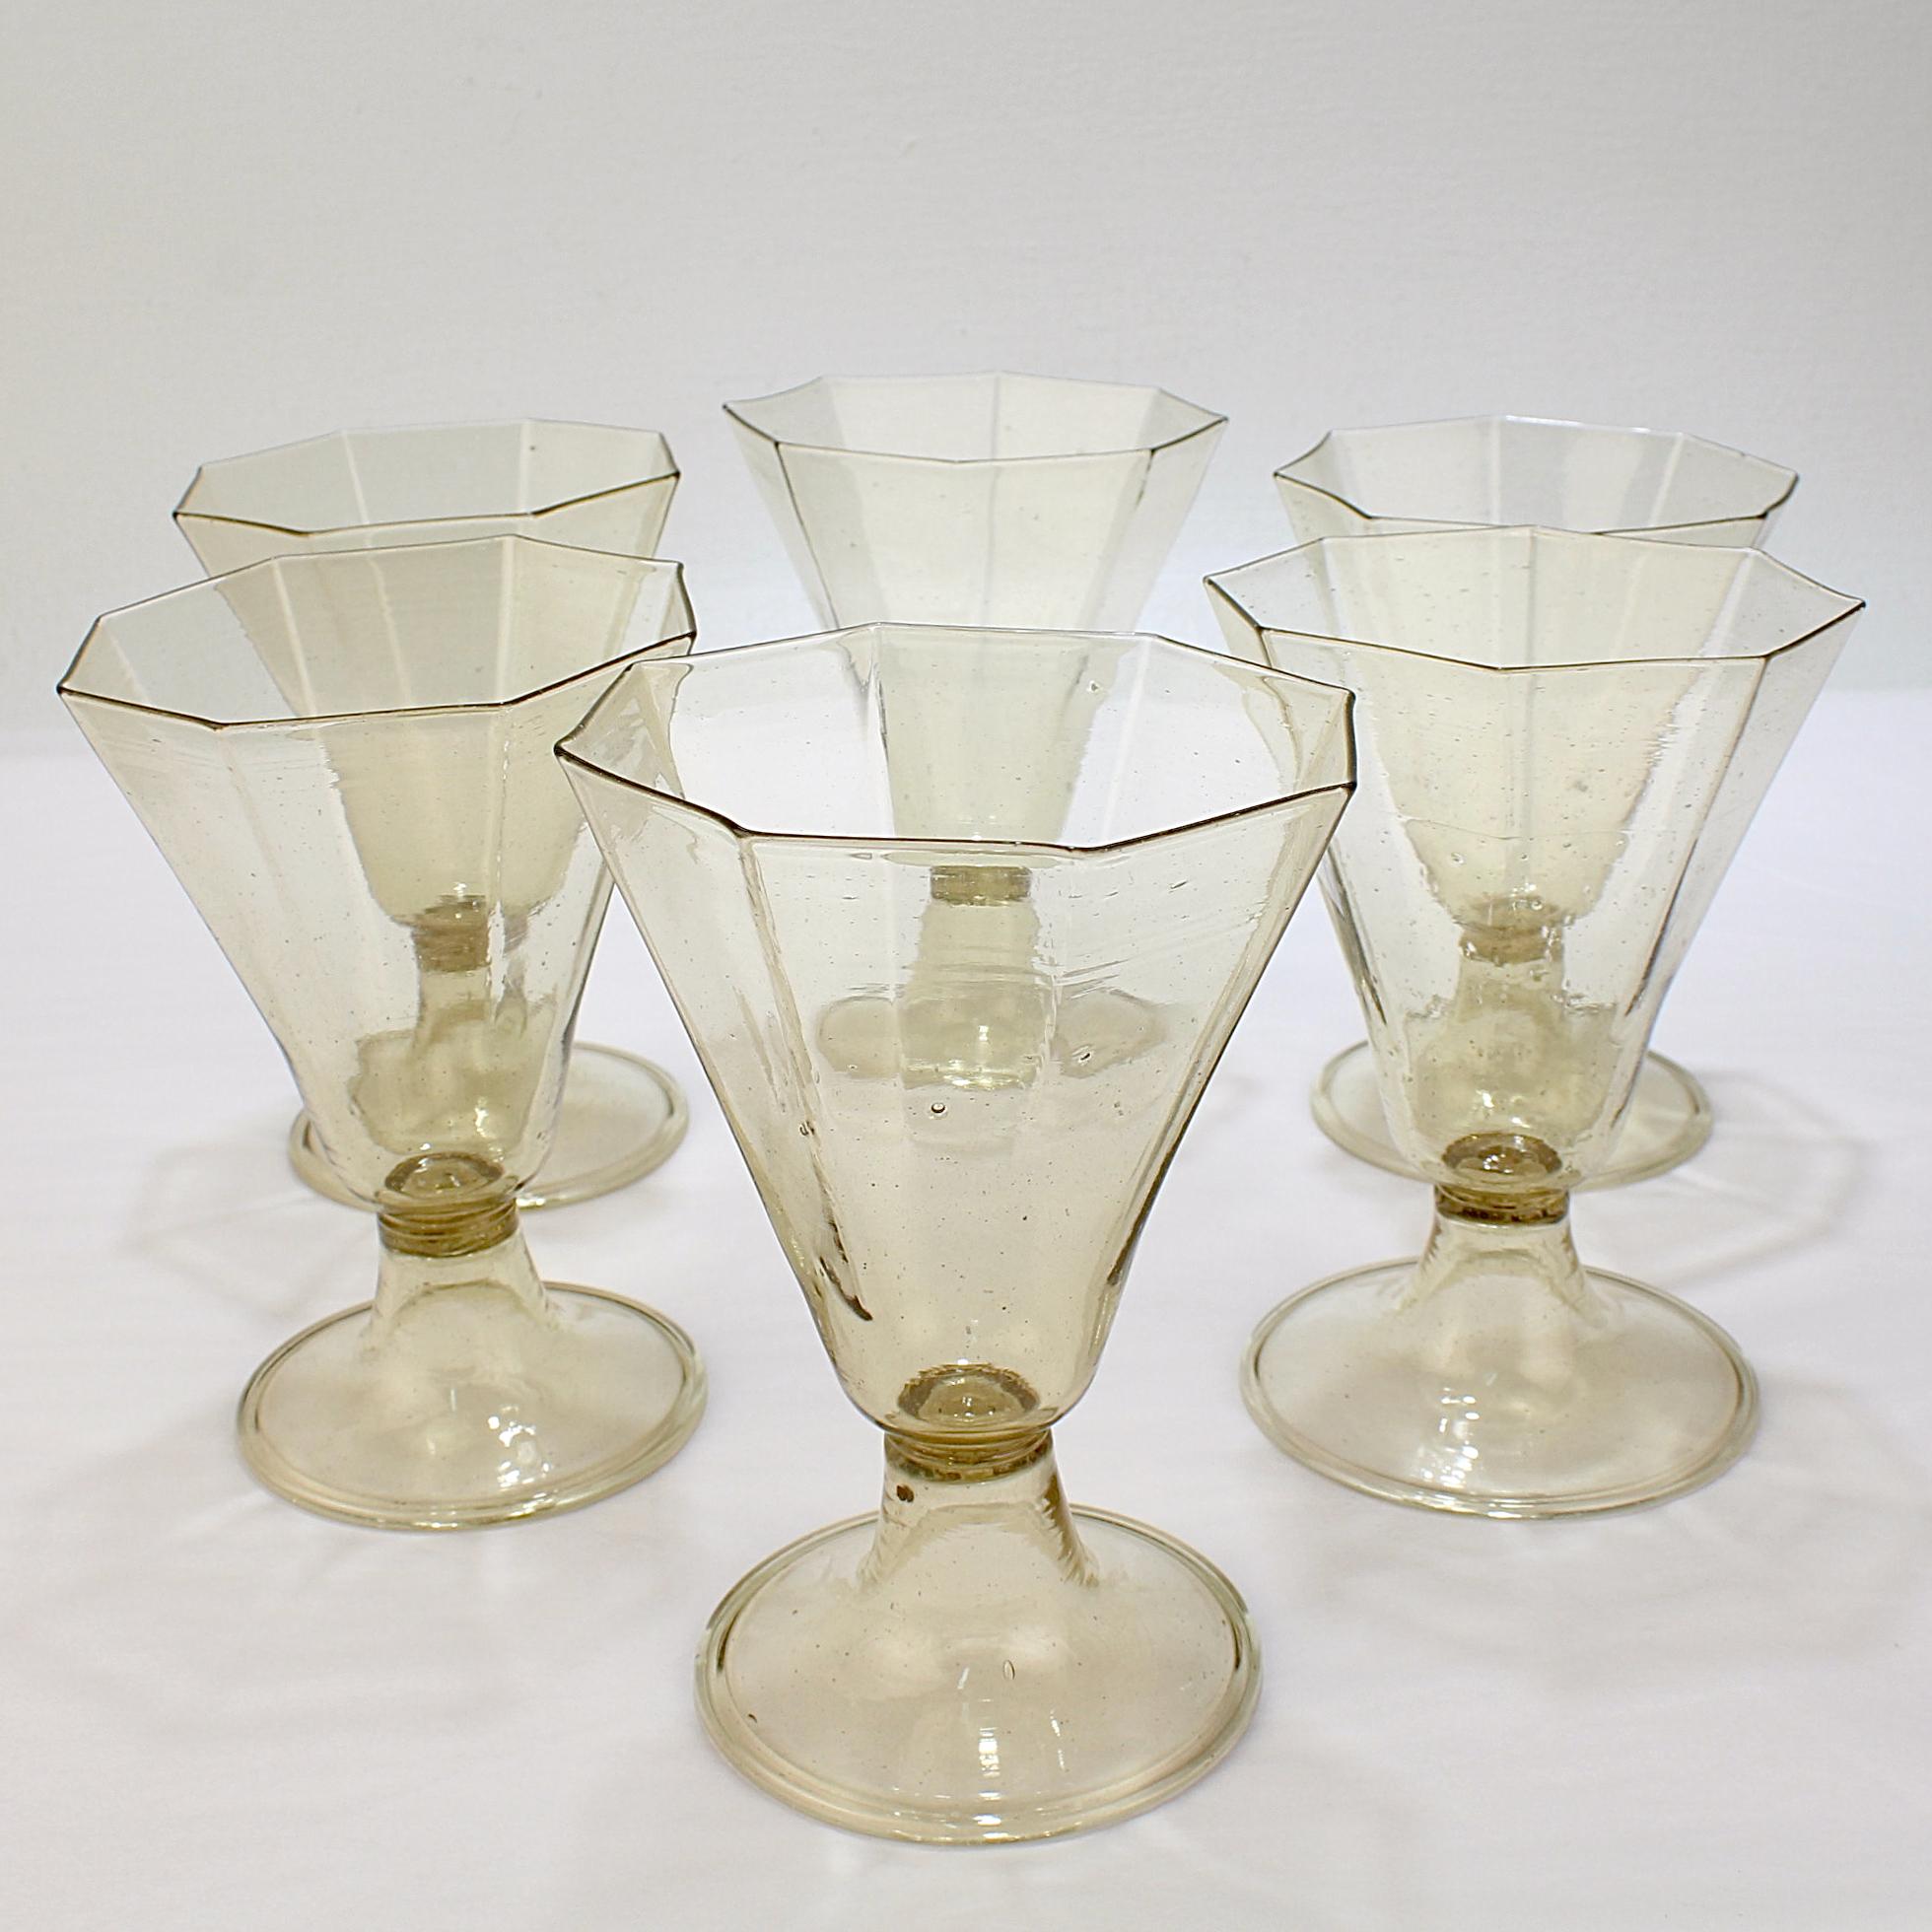 A fine set of vintage Venetian glass wine glasses.

With a delicate octagonal cup supported by an inverted trumpet form base with a folded foot. 

In amber glass with captured bubbles sprinkled throughout. 

Simply a wonderful